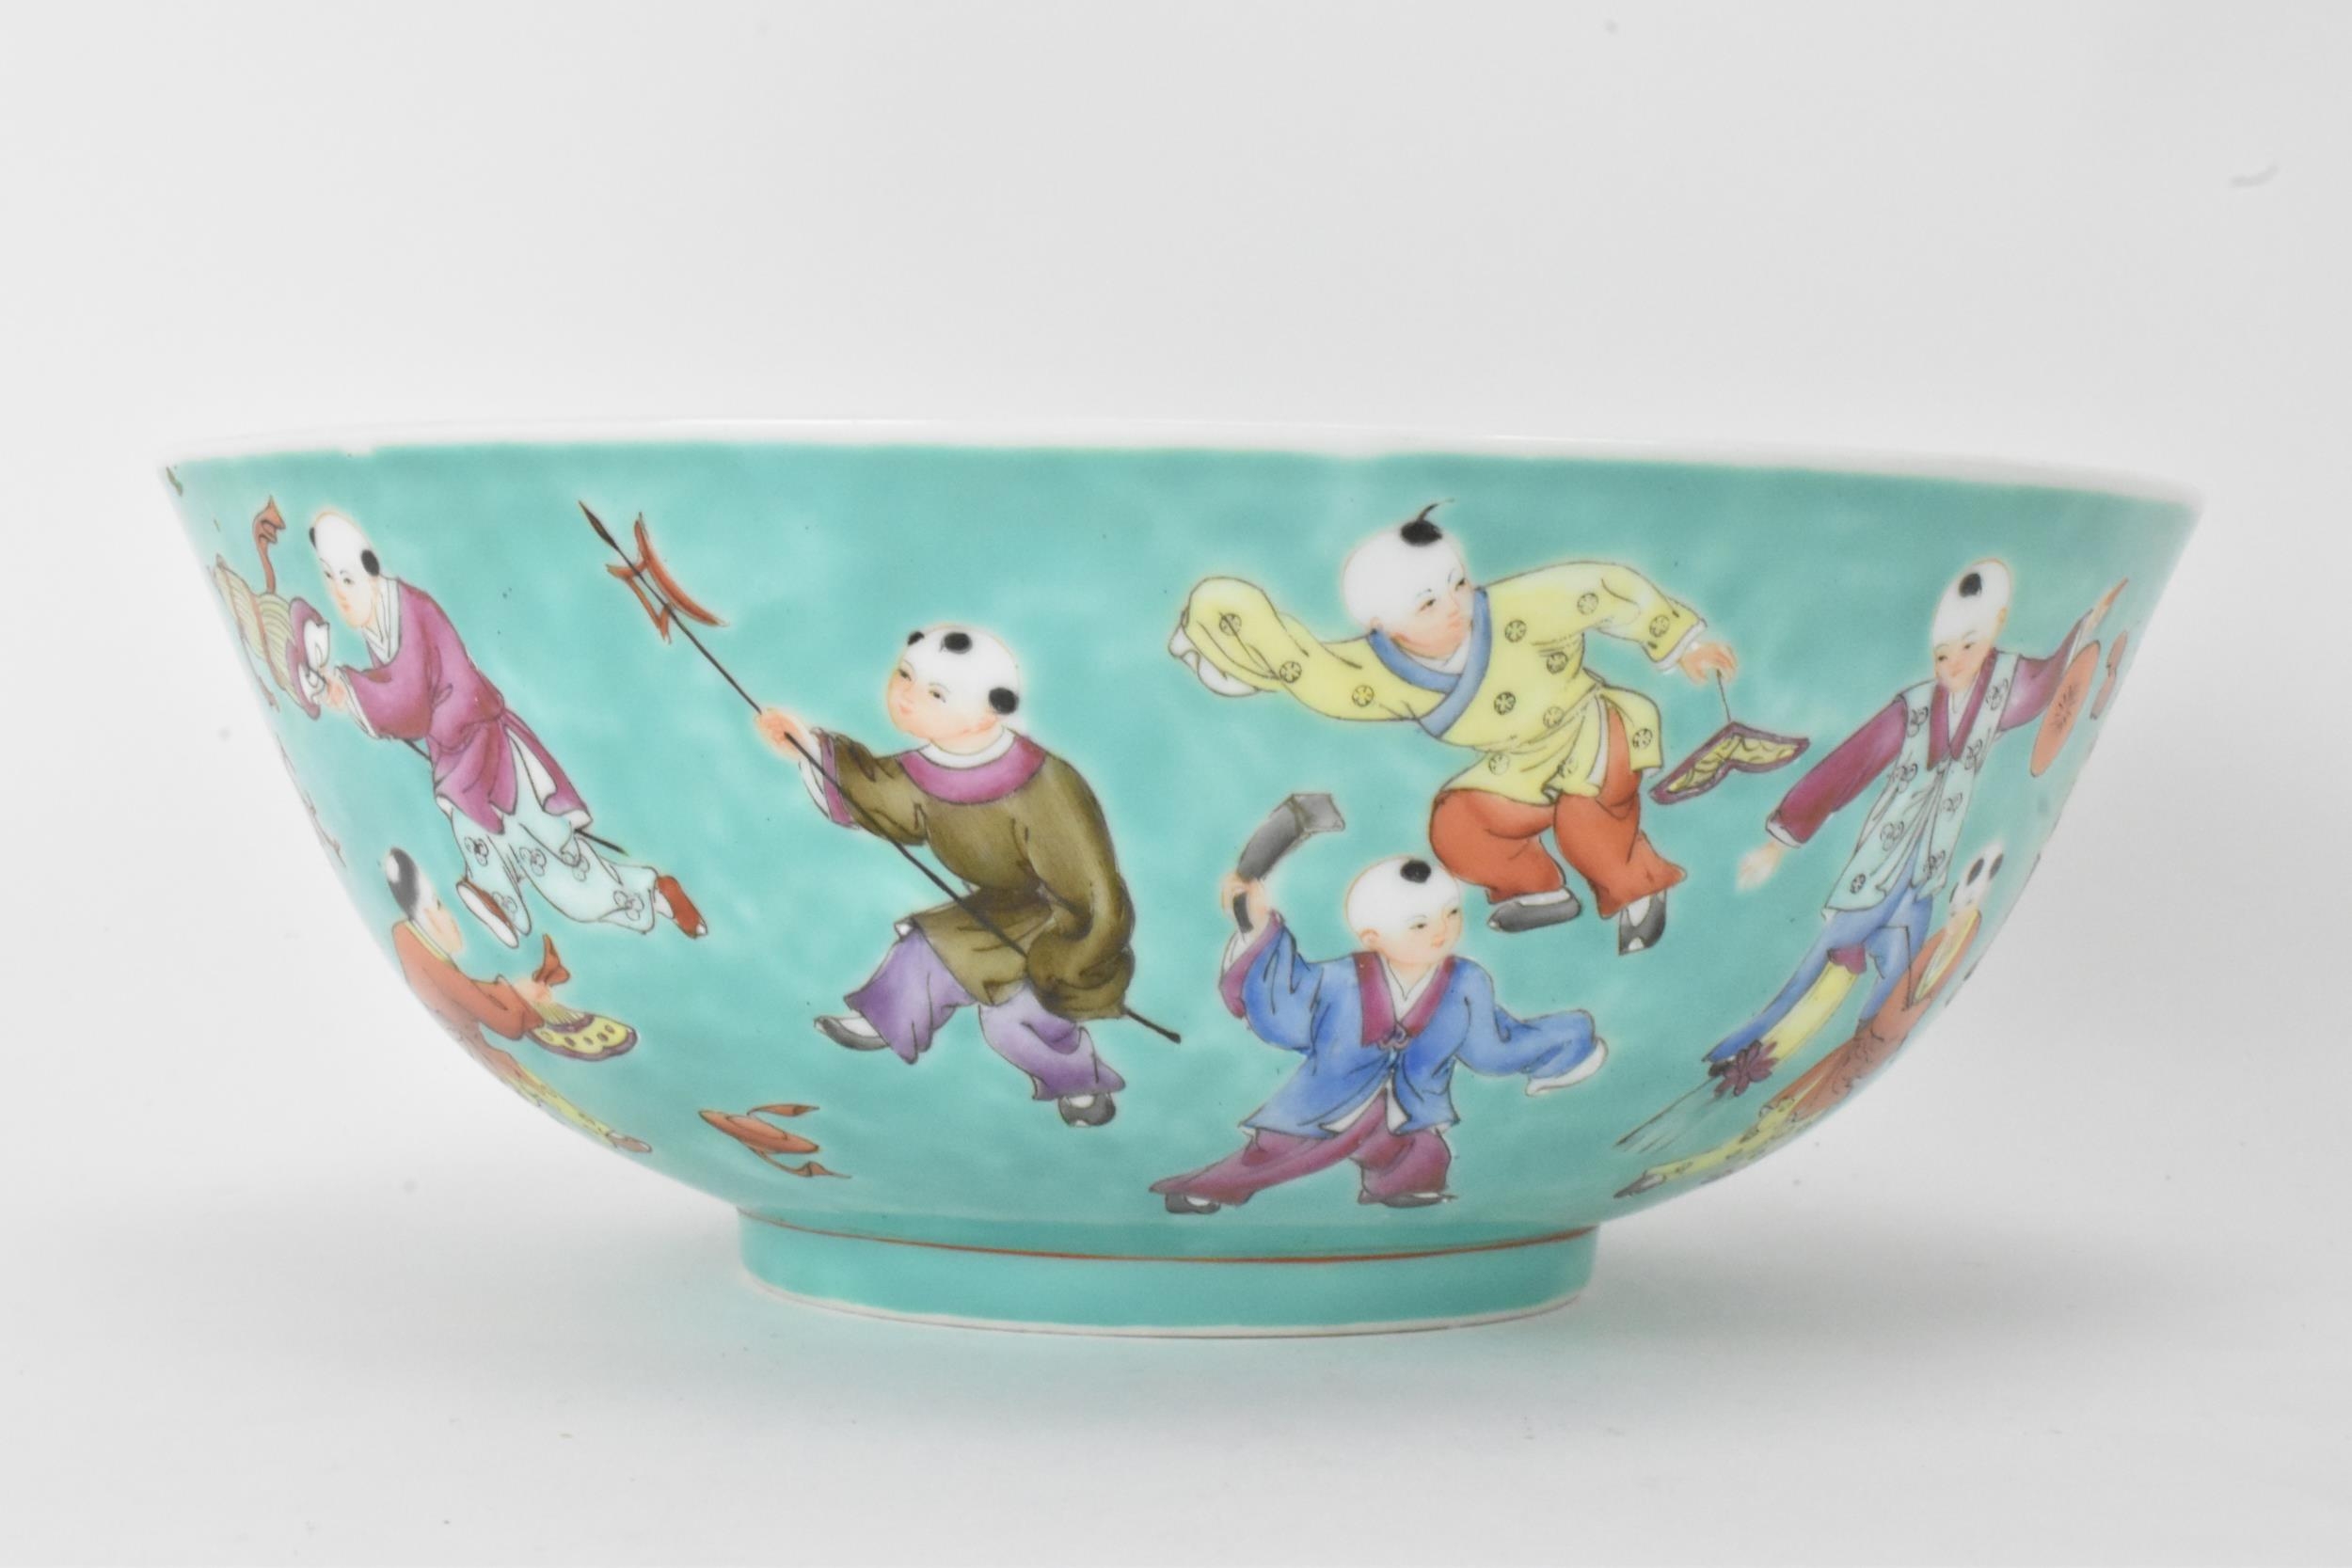 A Chinese Famille Rose porcelain bowl, on a turquoise ground and decorated in various enamels